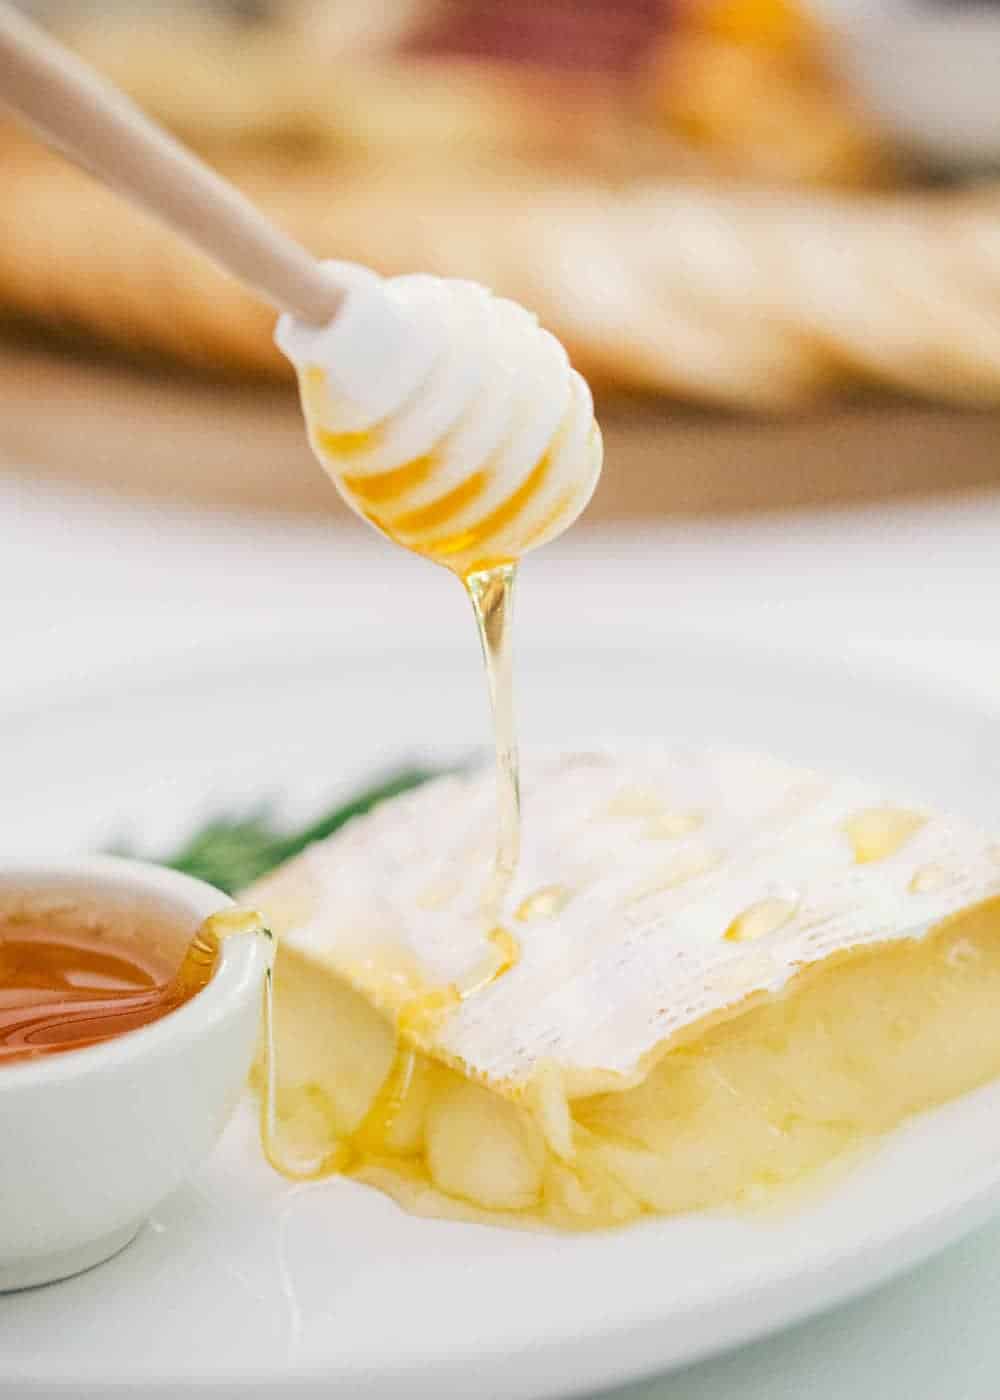 Using a honey dipper to drizzle honey onto baked brie.